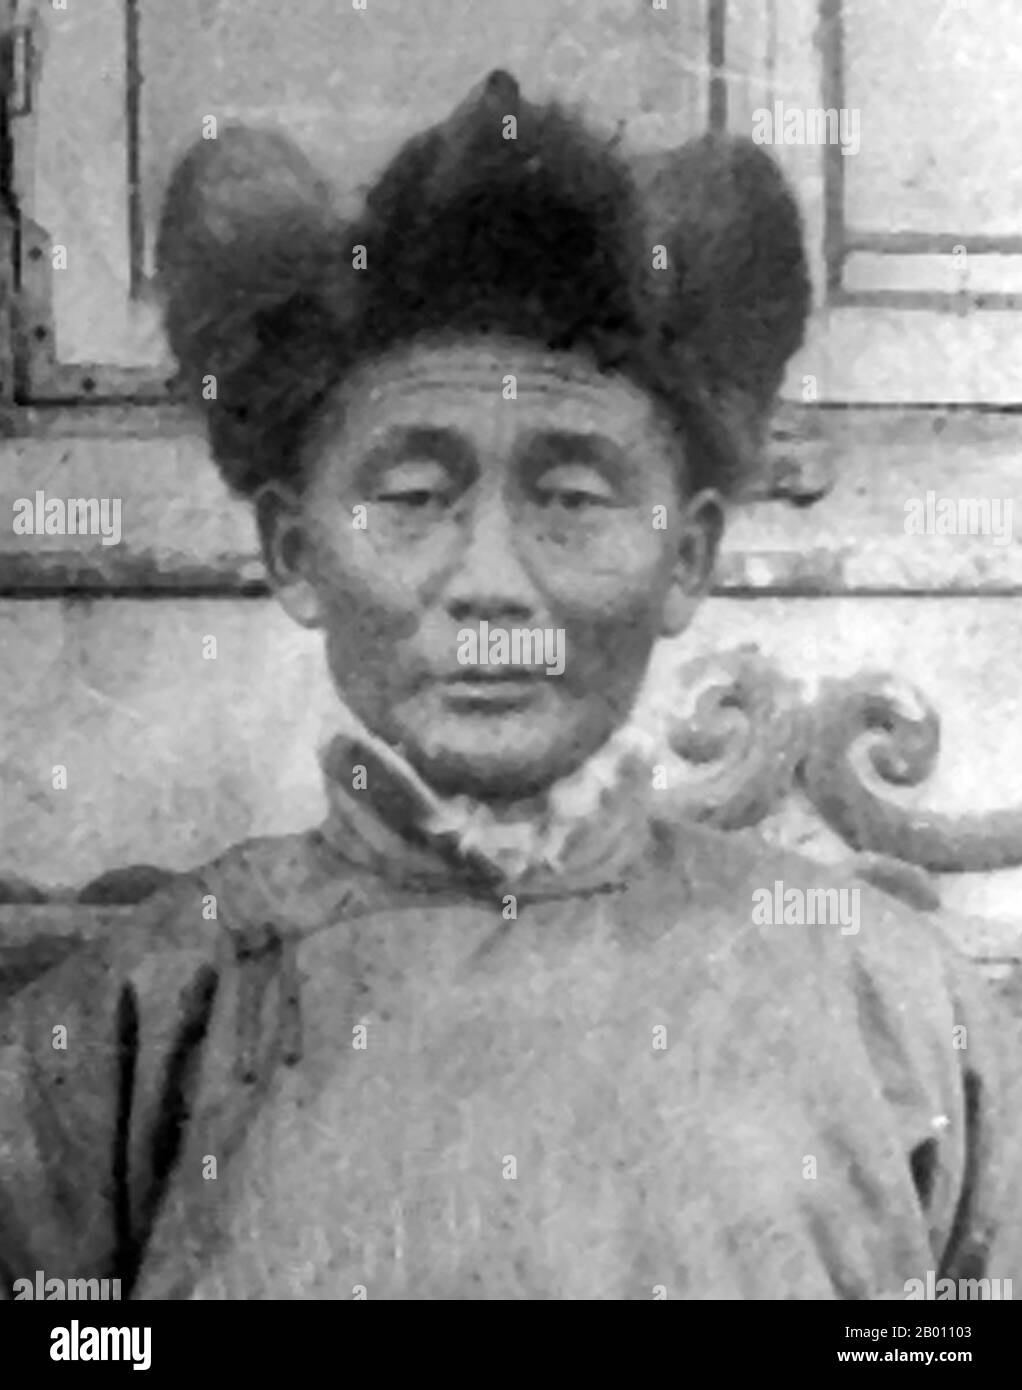 Mongolia: Soliin Danzan (1885 – 1924), Mongolian revolutionary and chairman of the Central Committee of the Mongolian People's Revolutionary Party, 1924.  Soliin Danzan (1885 – 1924) was a Mongolian revolutionary and chairman of the Central Committee of the Mongolian People's Revolutionary Party. Danzan was working as a customs official when he founded one of the two groups that would later unite to form the MPRP in 1919, after the lower house of parliament was dissolved. He was known as one of the First Seven leaders of the MPRP. Stock Photo